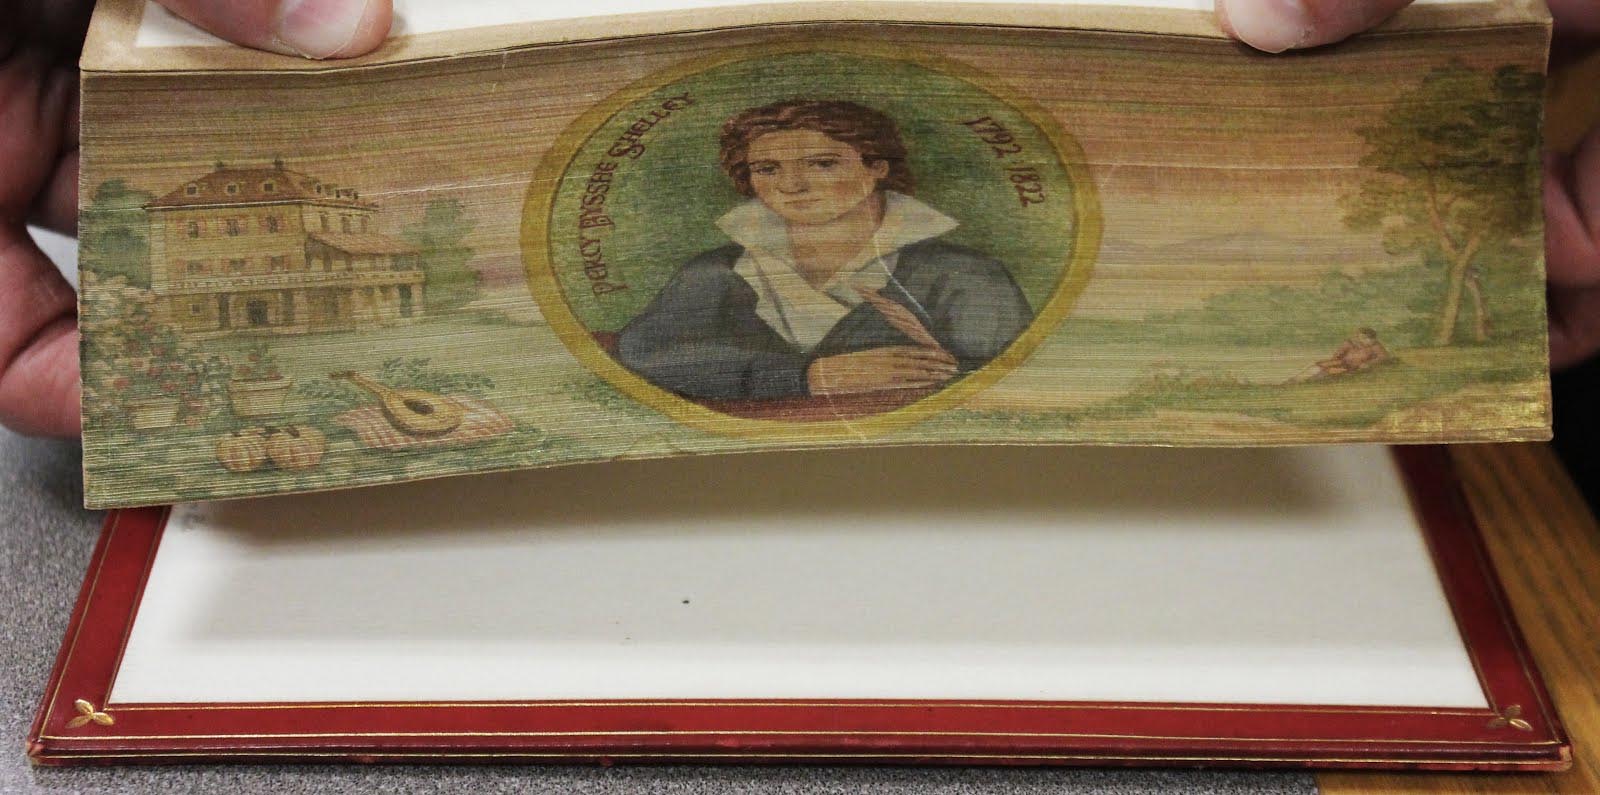 Colorful fore-edge painting of poet Percy Bysshe Shelley in the center of a quiet backyard scene with a large house, lute, and picnic blanket in view